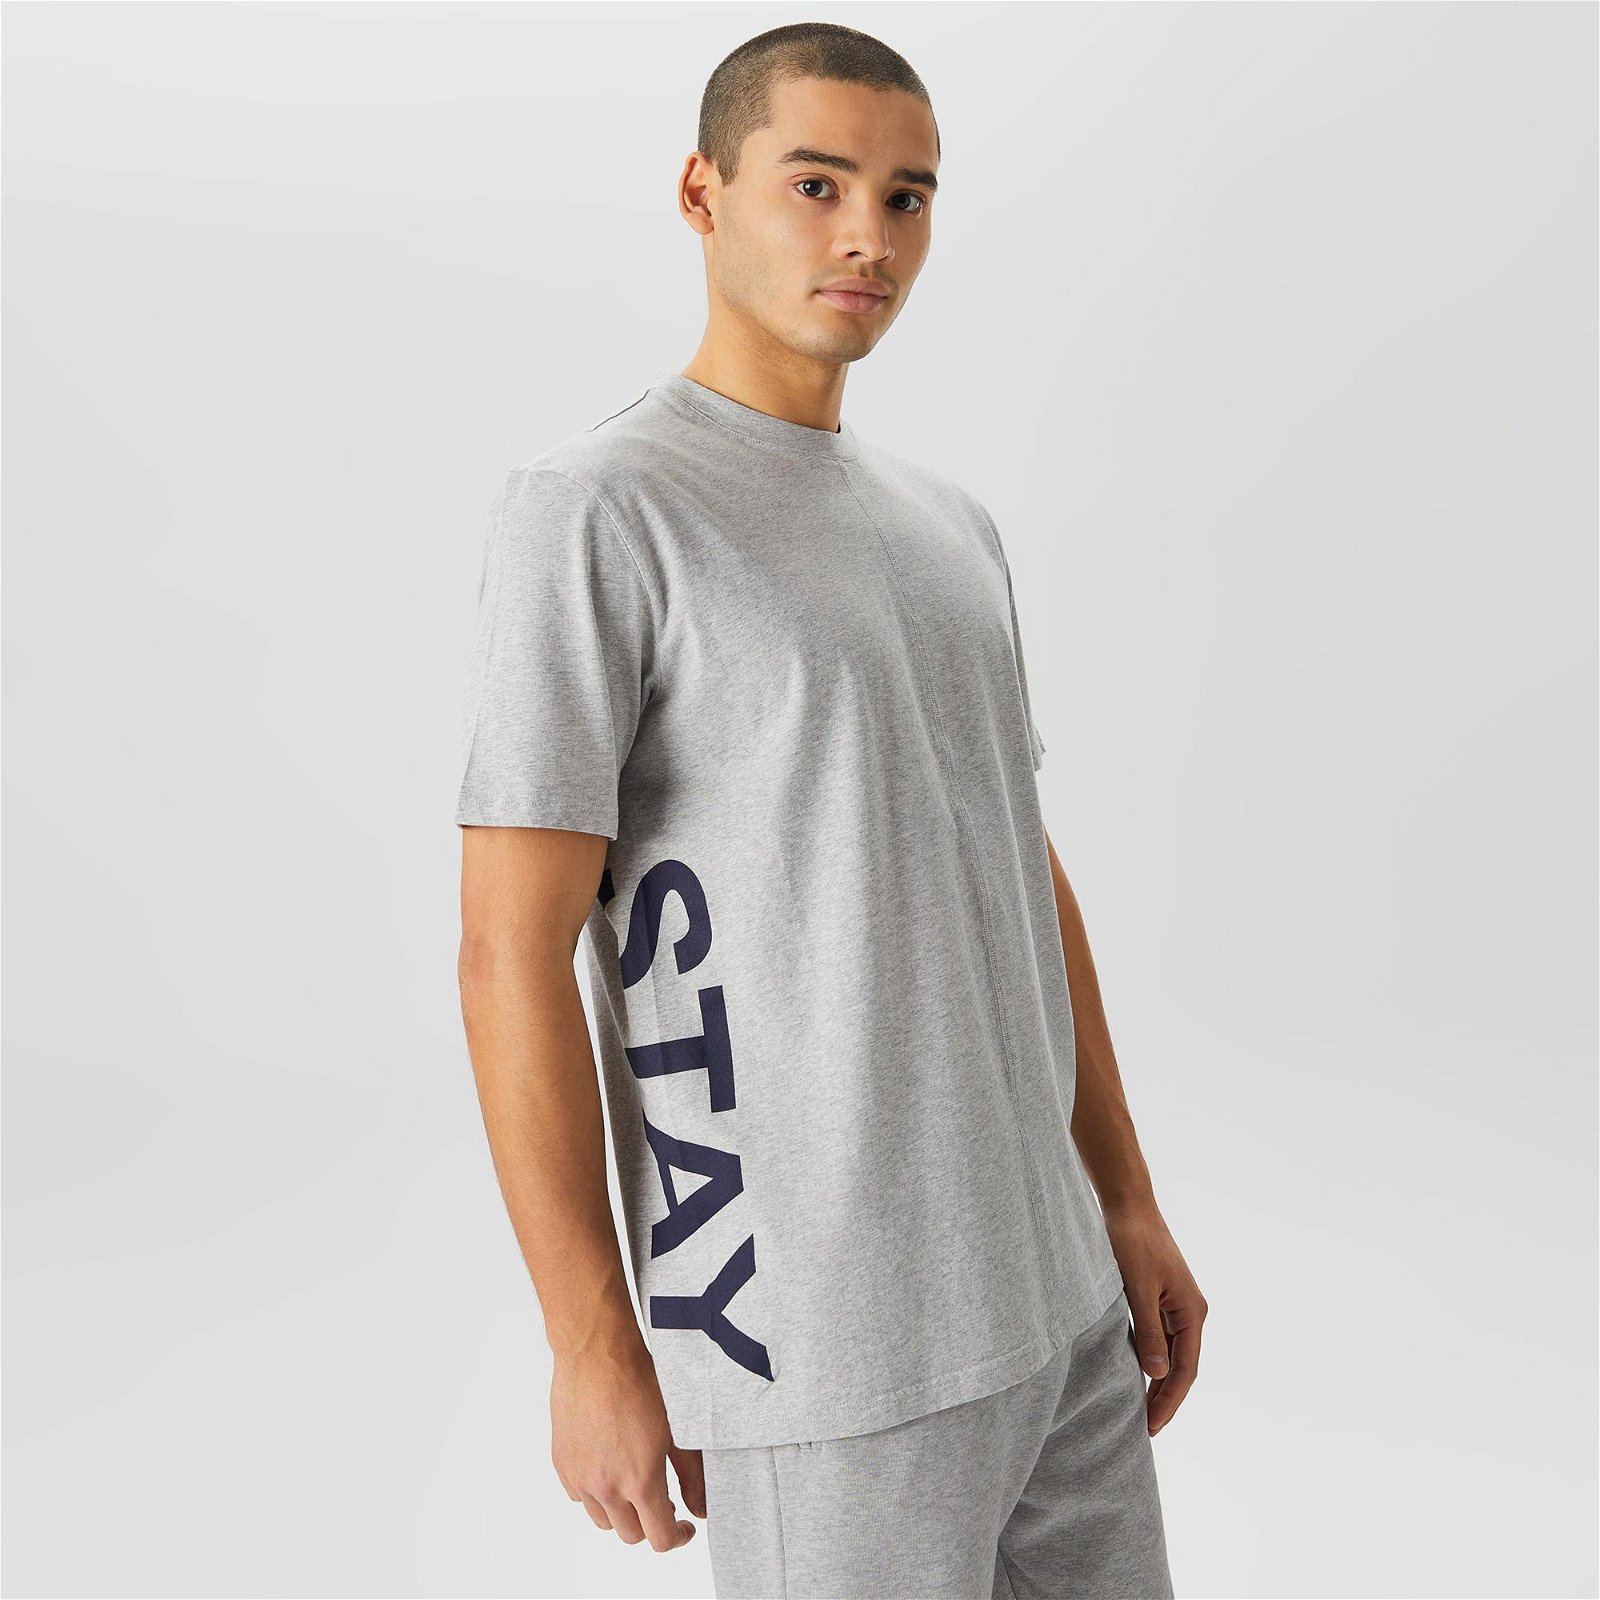 The Stay Line Soley Unisex Gri T-Shirt